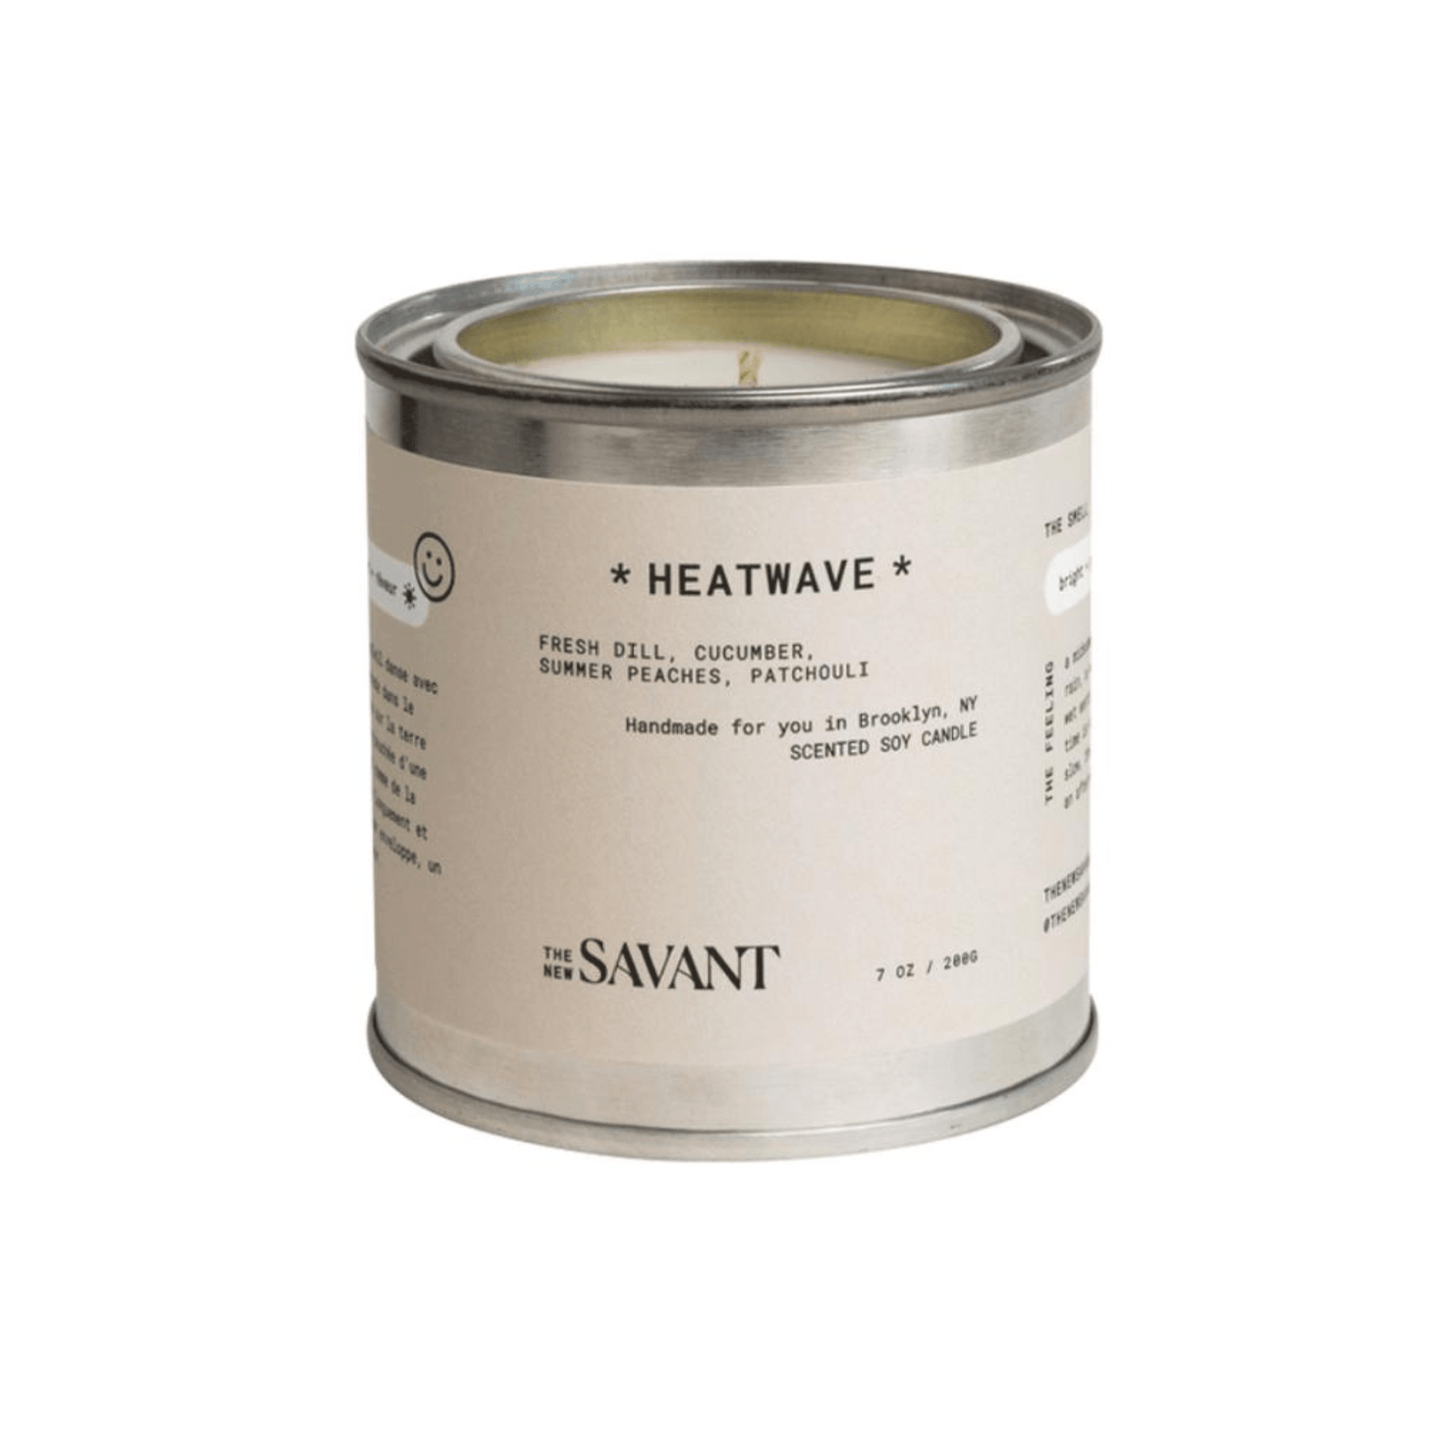 Primary Image of Heatwave Candle